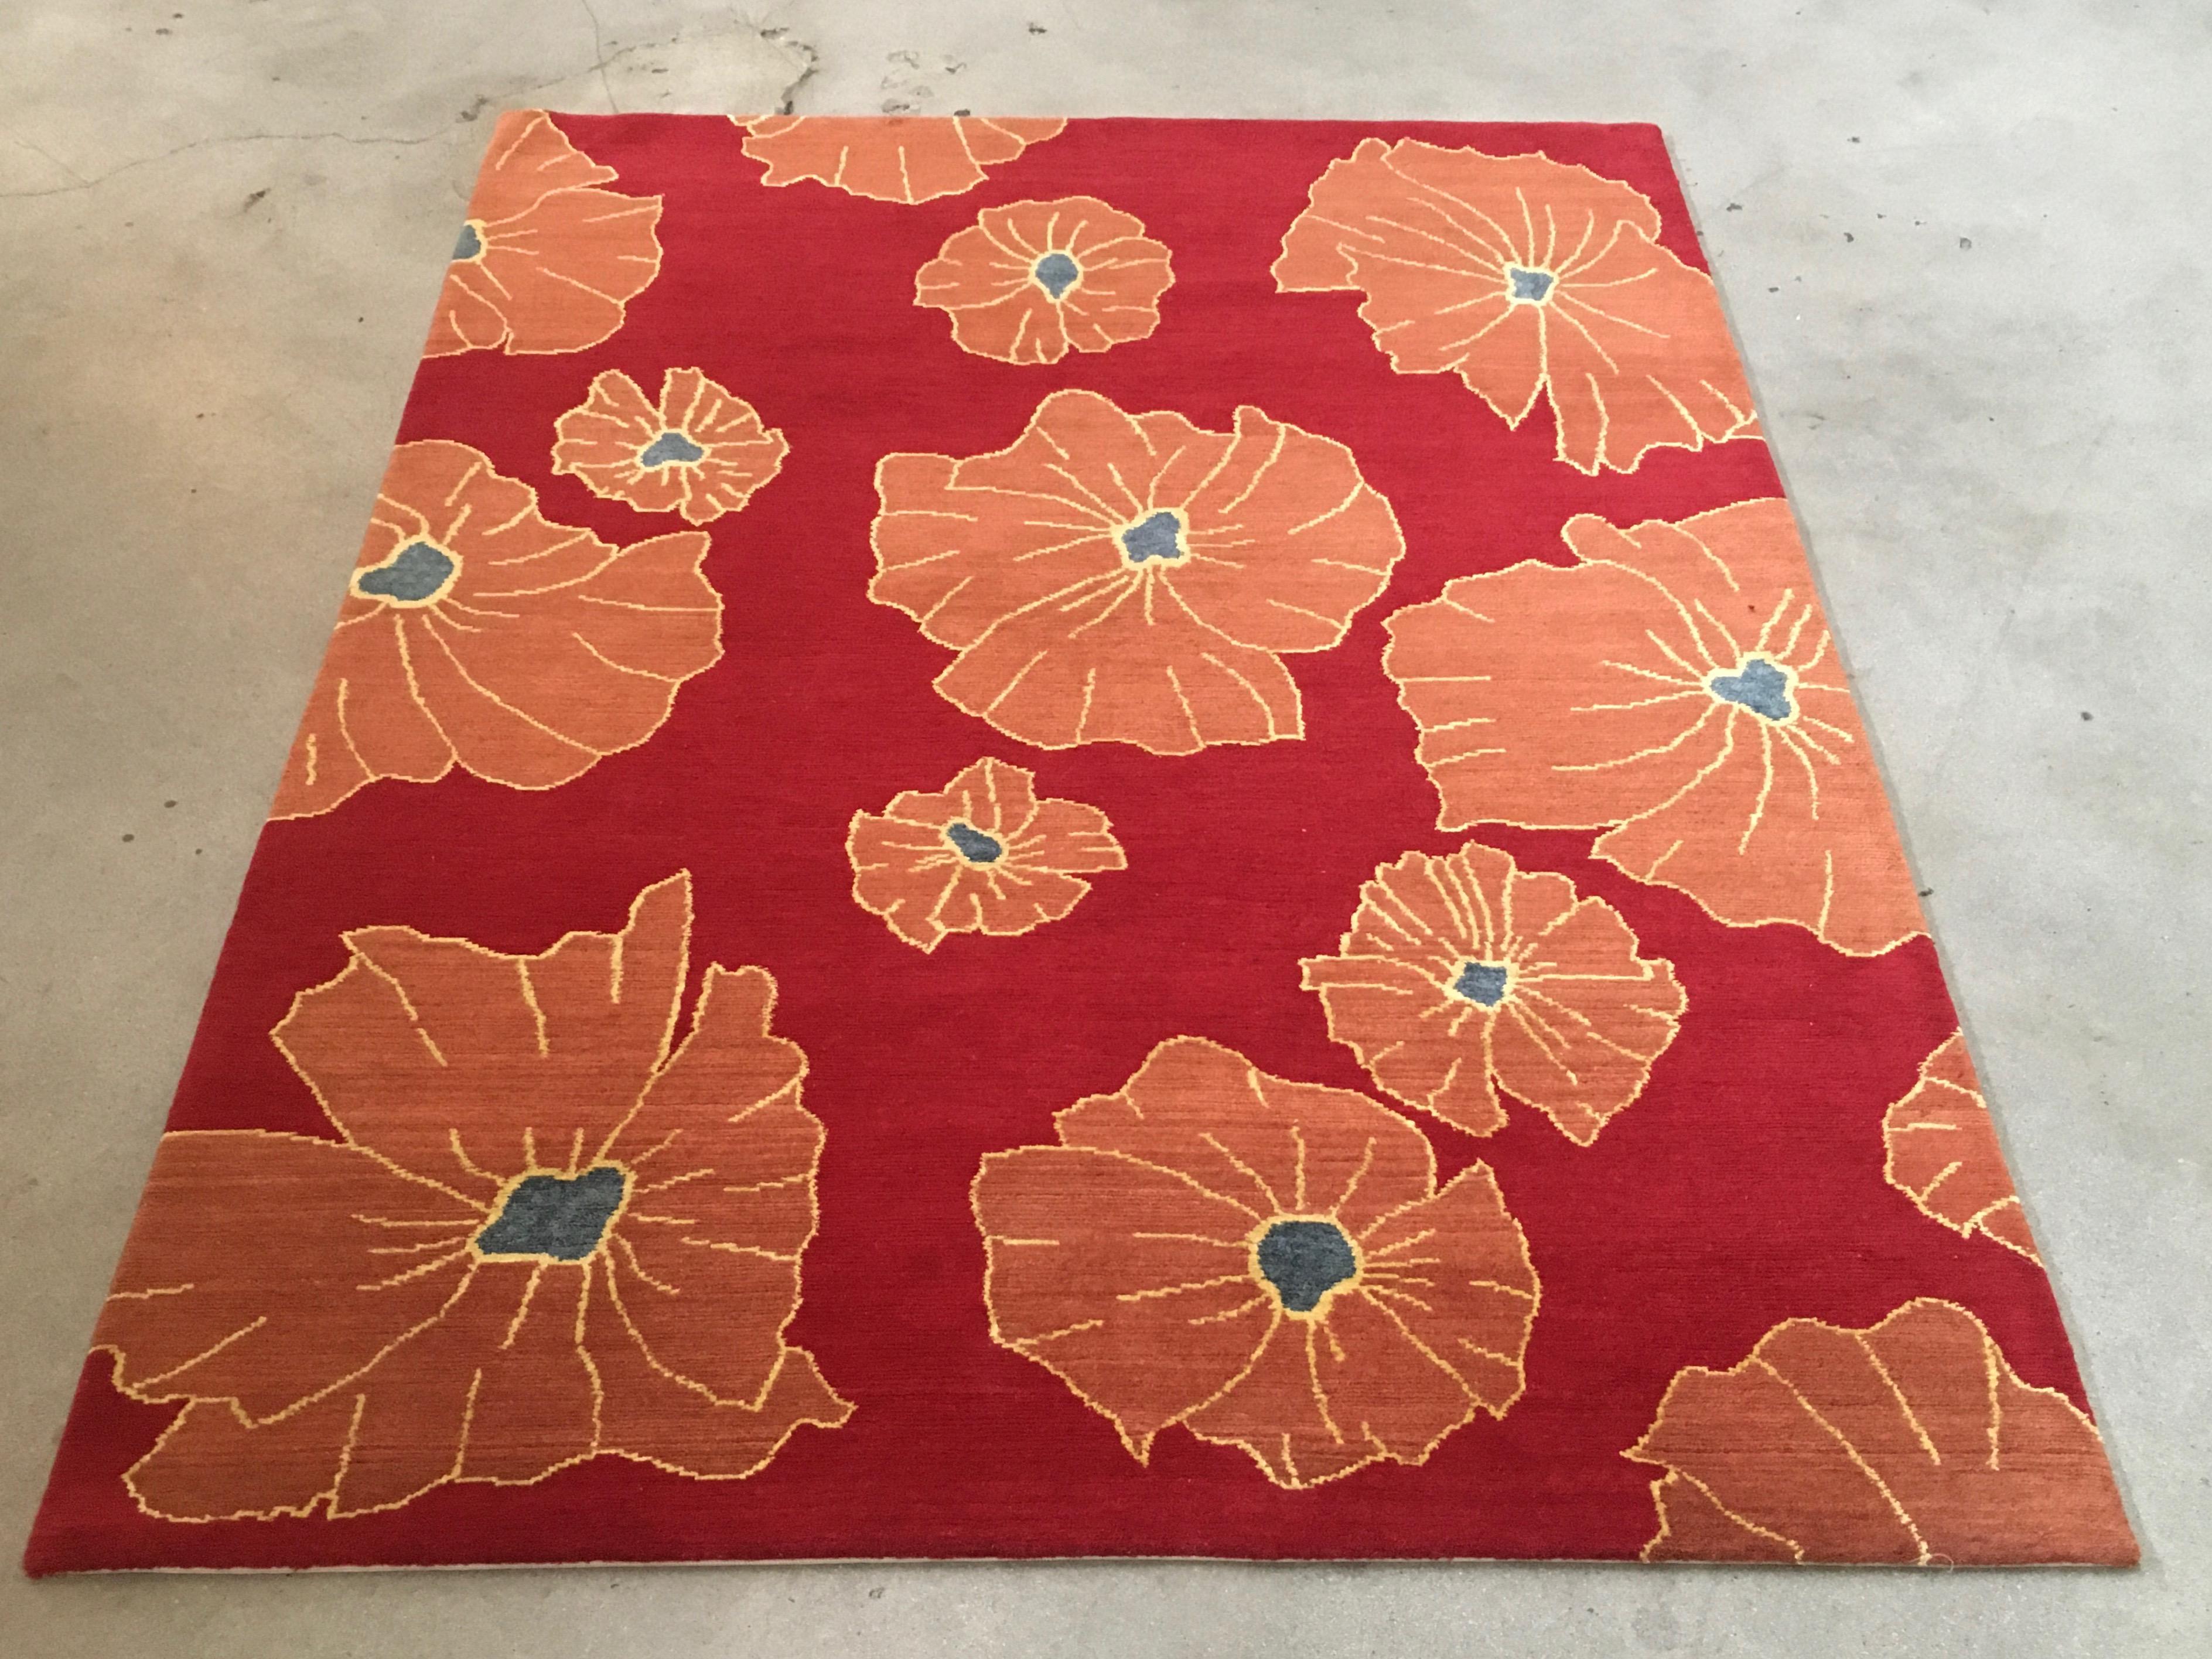 Floral red rug
Colors: Red, rust, orange, blue and cream.